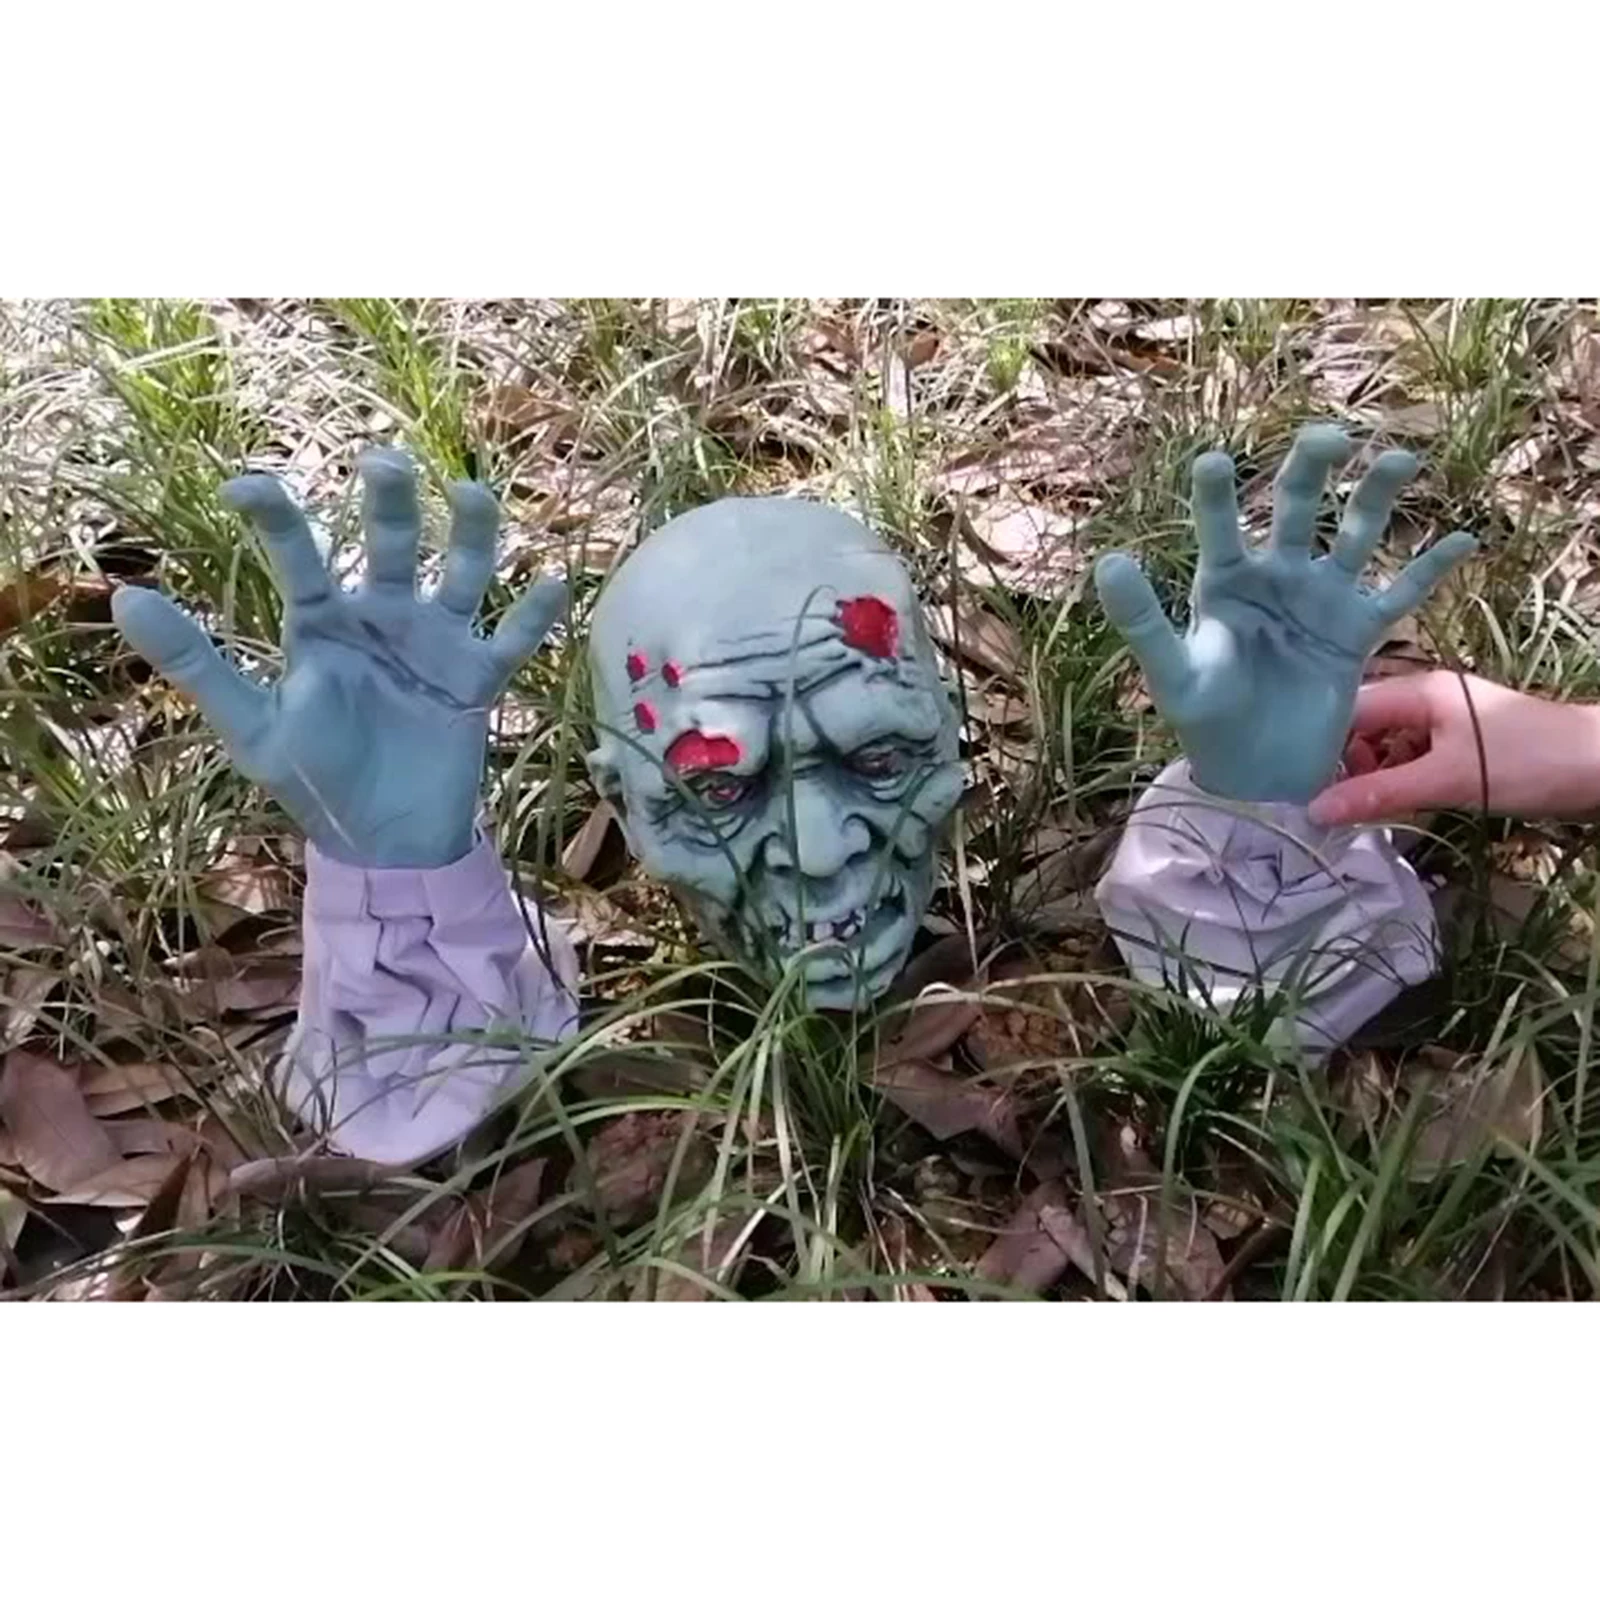 Scary Garden Zombie Decoration Outdoor Head Arms Ornament Statue Decor Stake